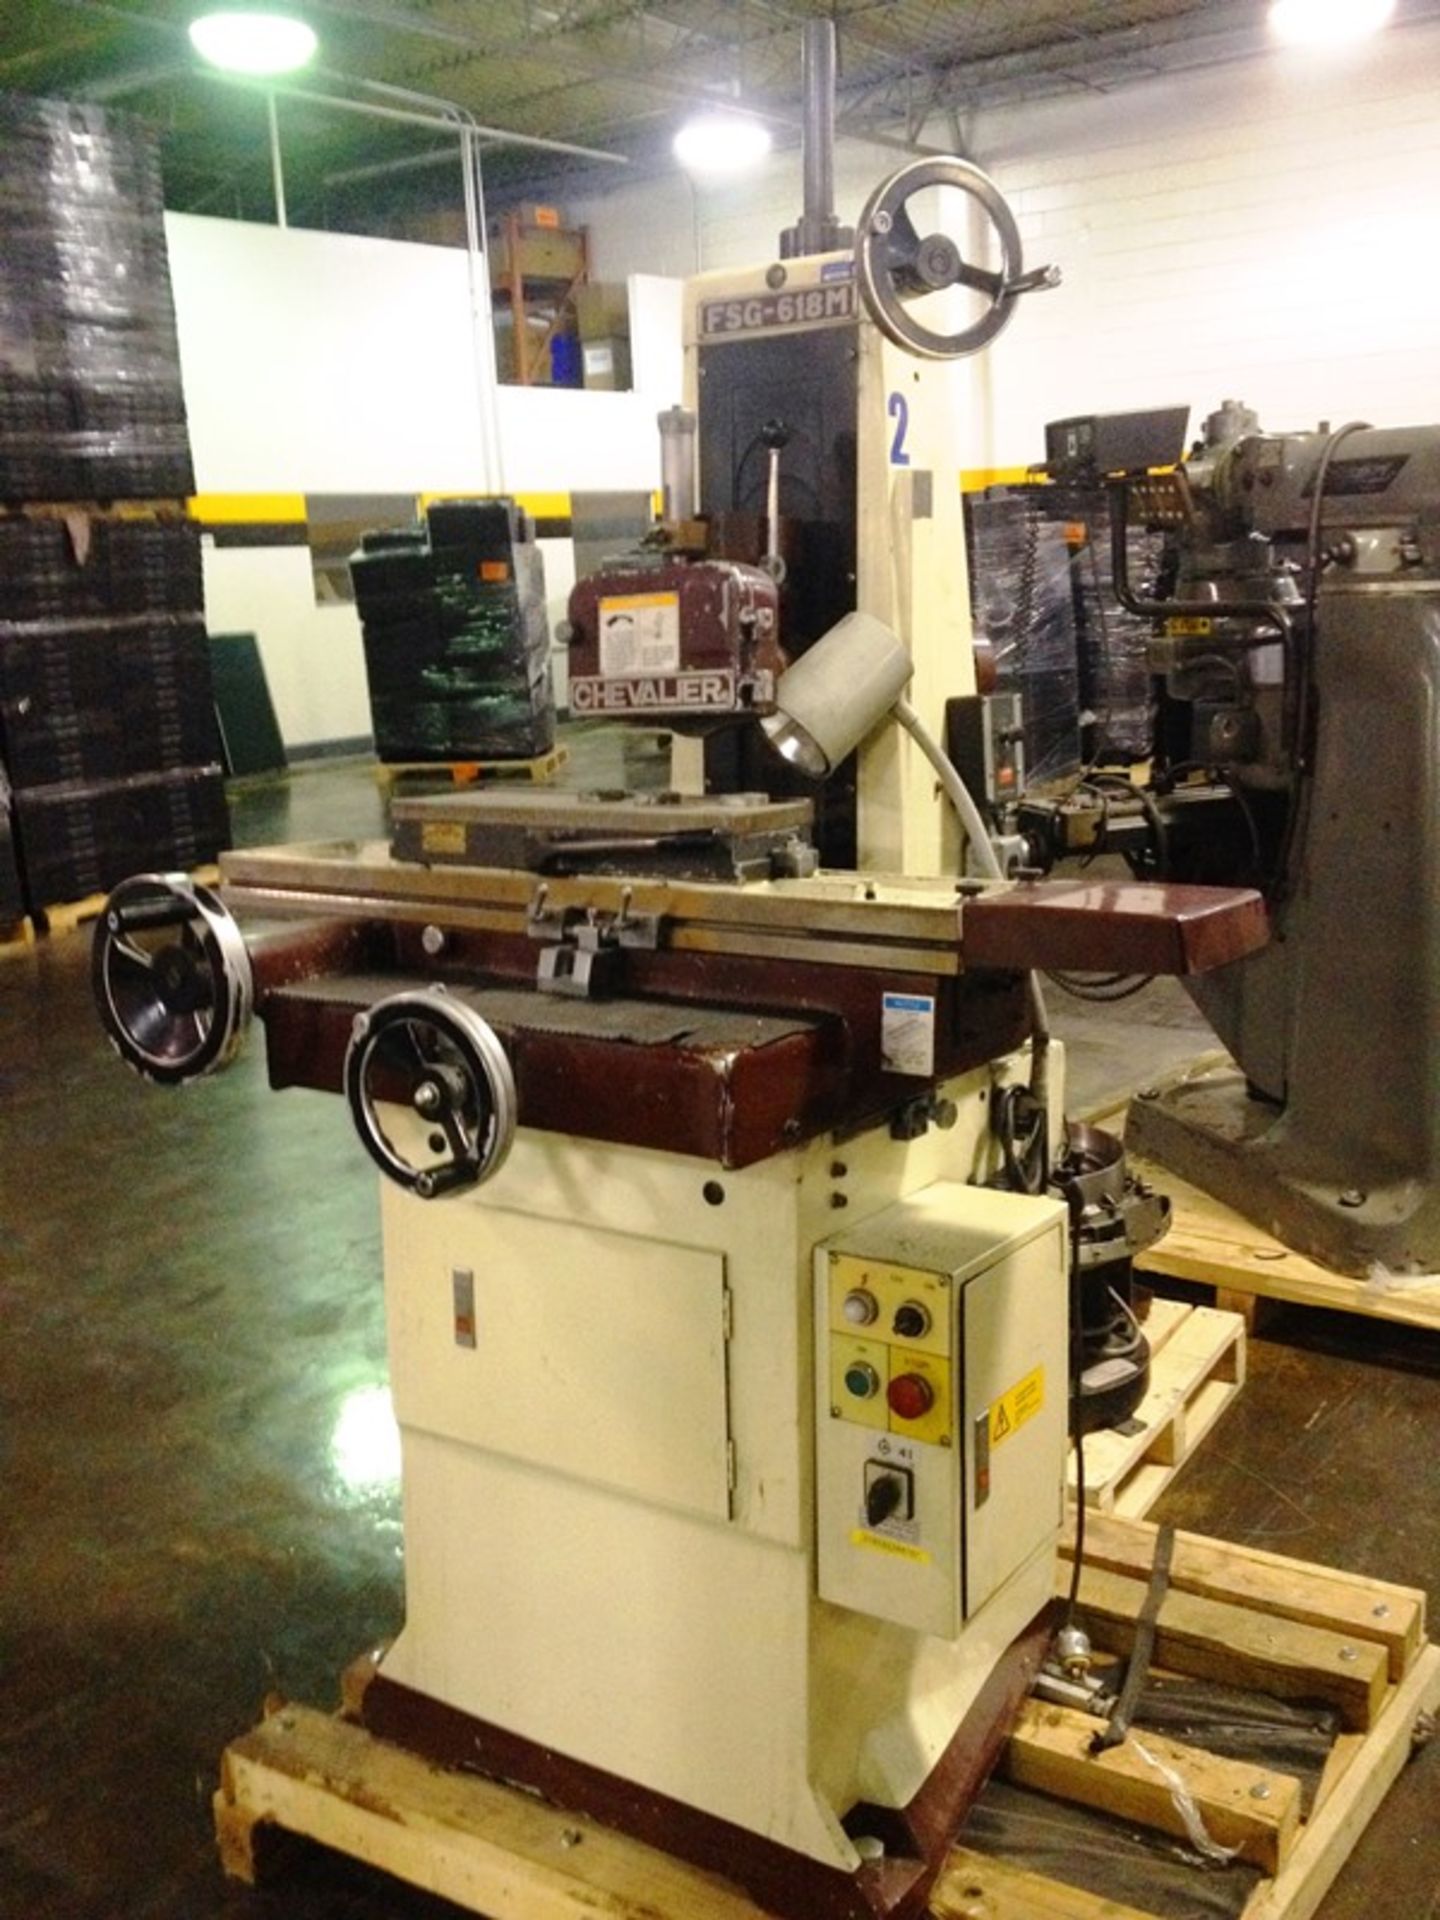 Surface Grinder, Brand: Chevalier, Model: FSG-6184, Series: A3841021. Condition: Good, Location: Cd. - Image 6 of 13